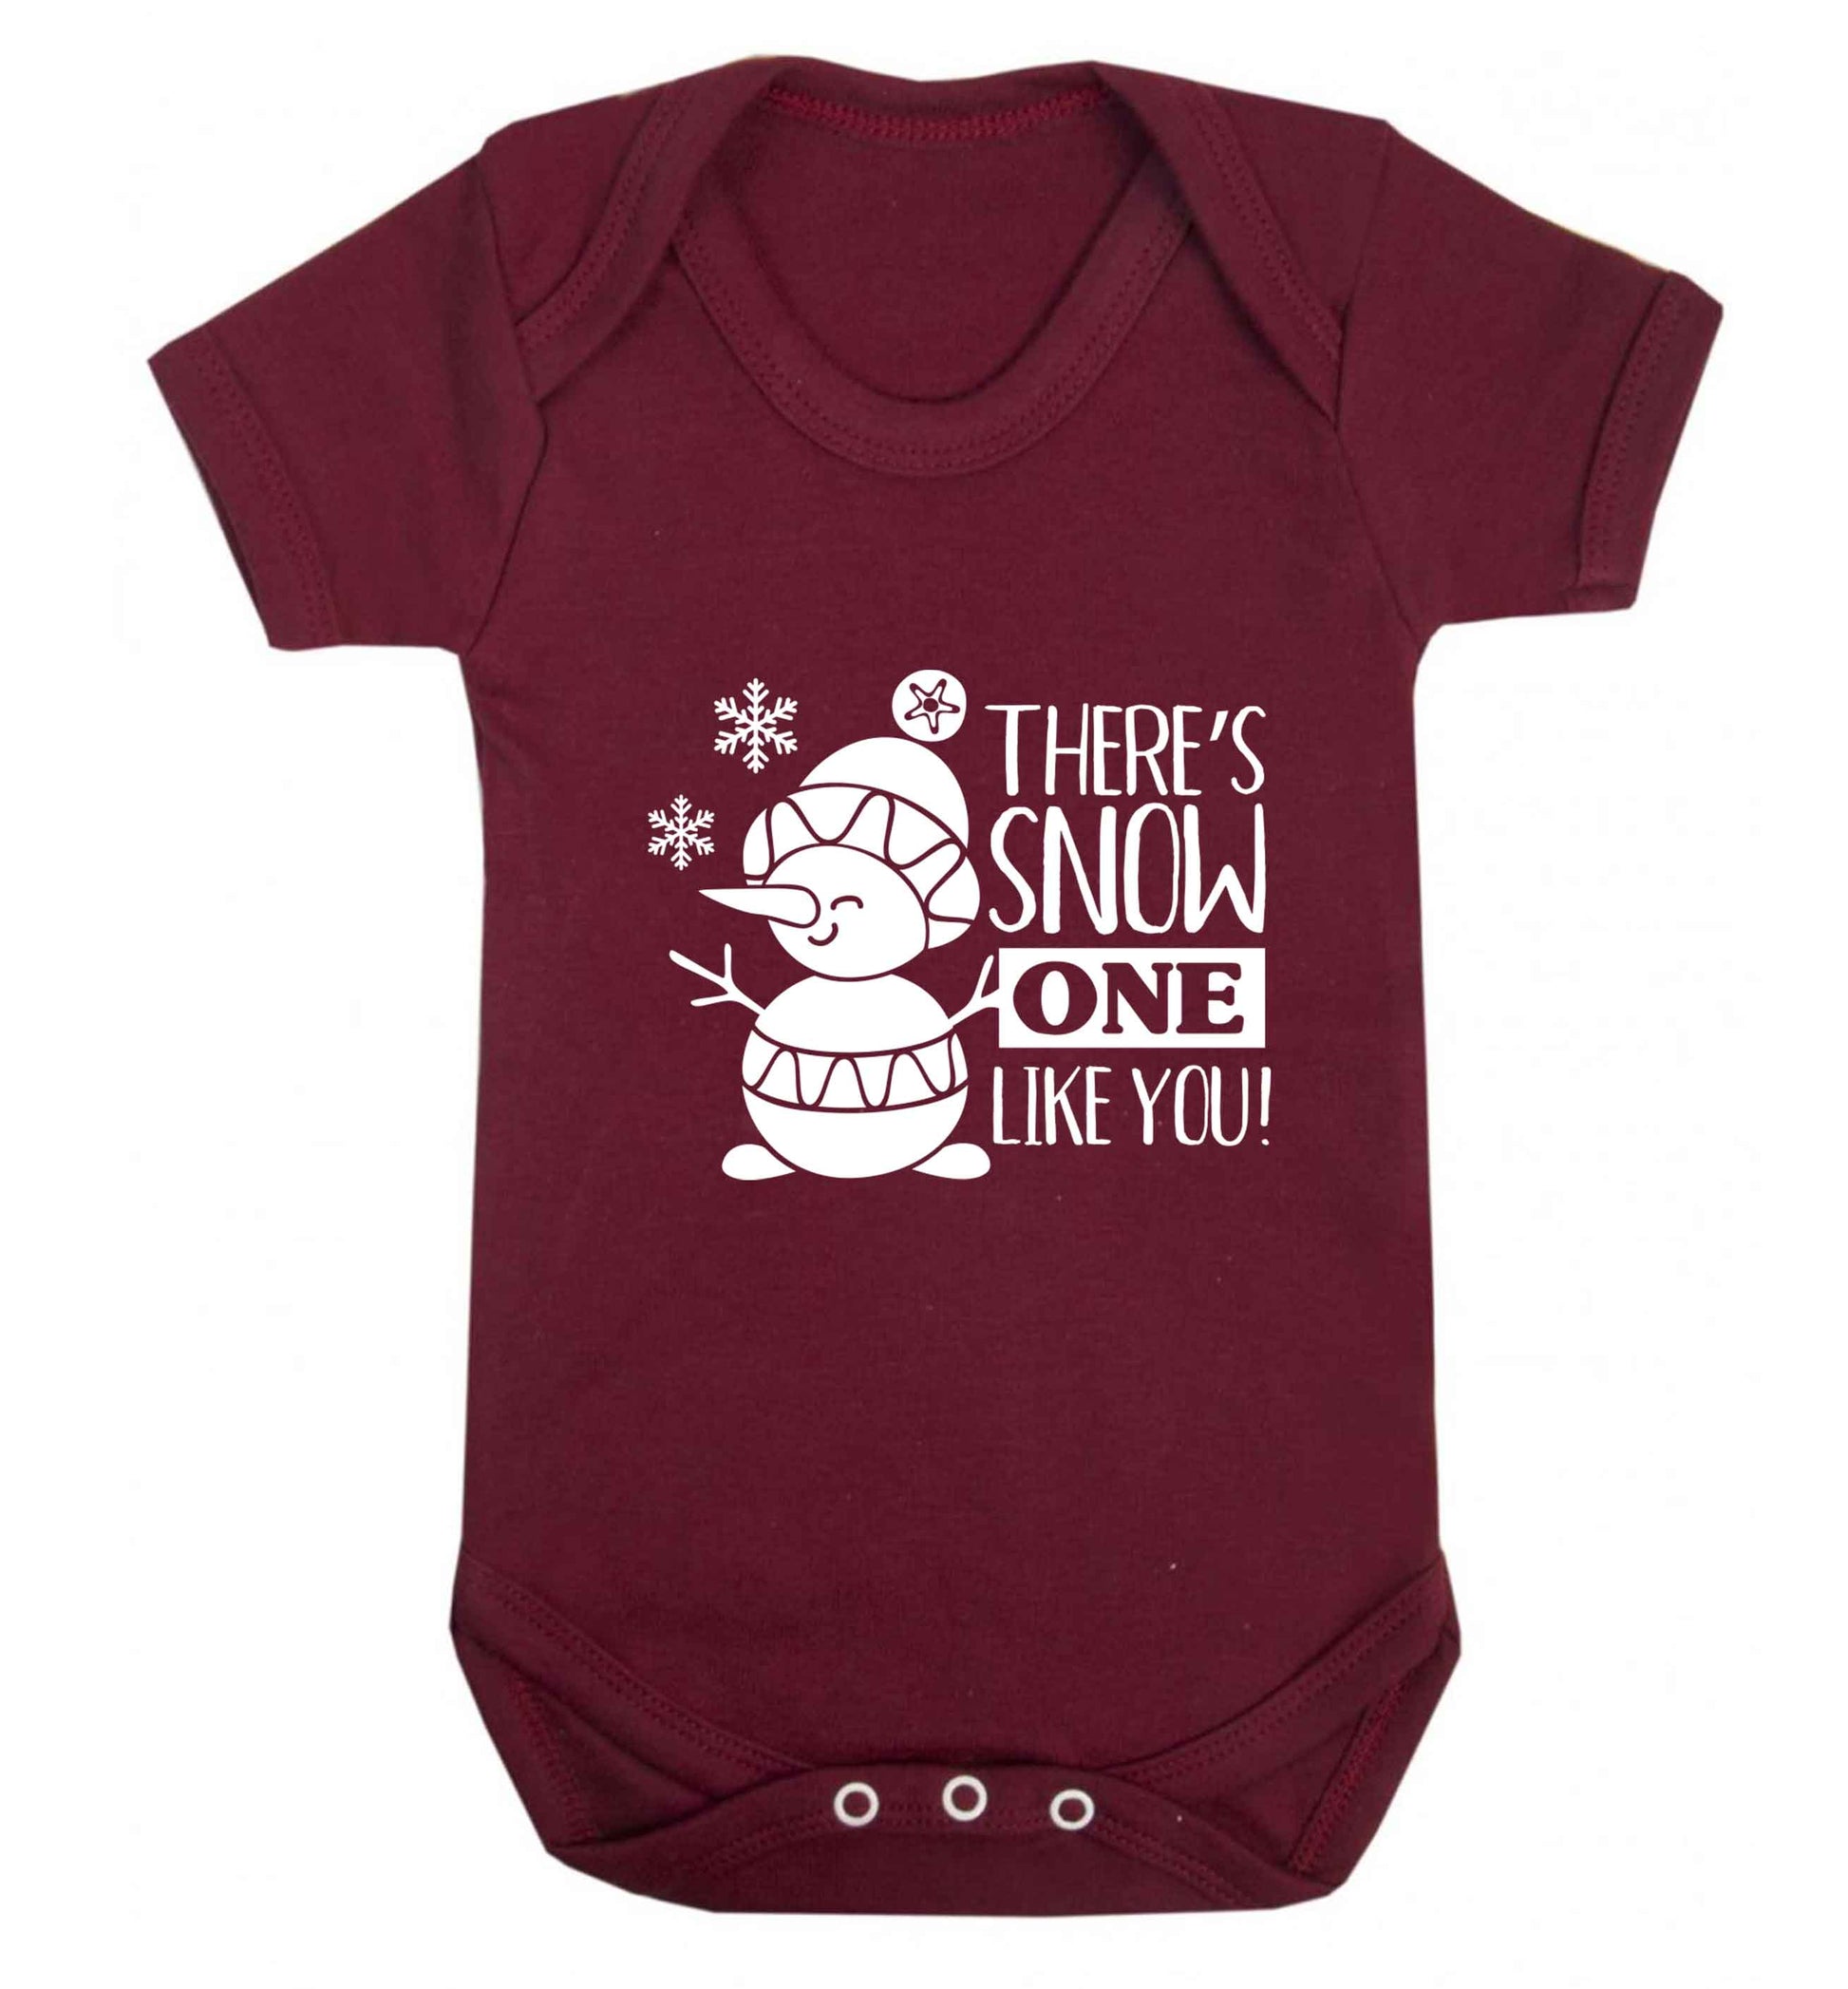 There's snow one like you baby vest maroon 18-24 months